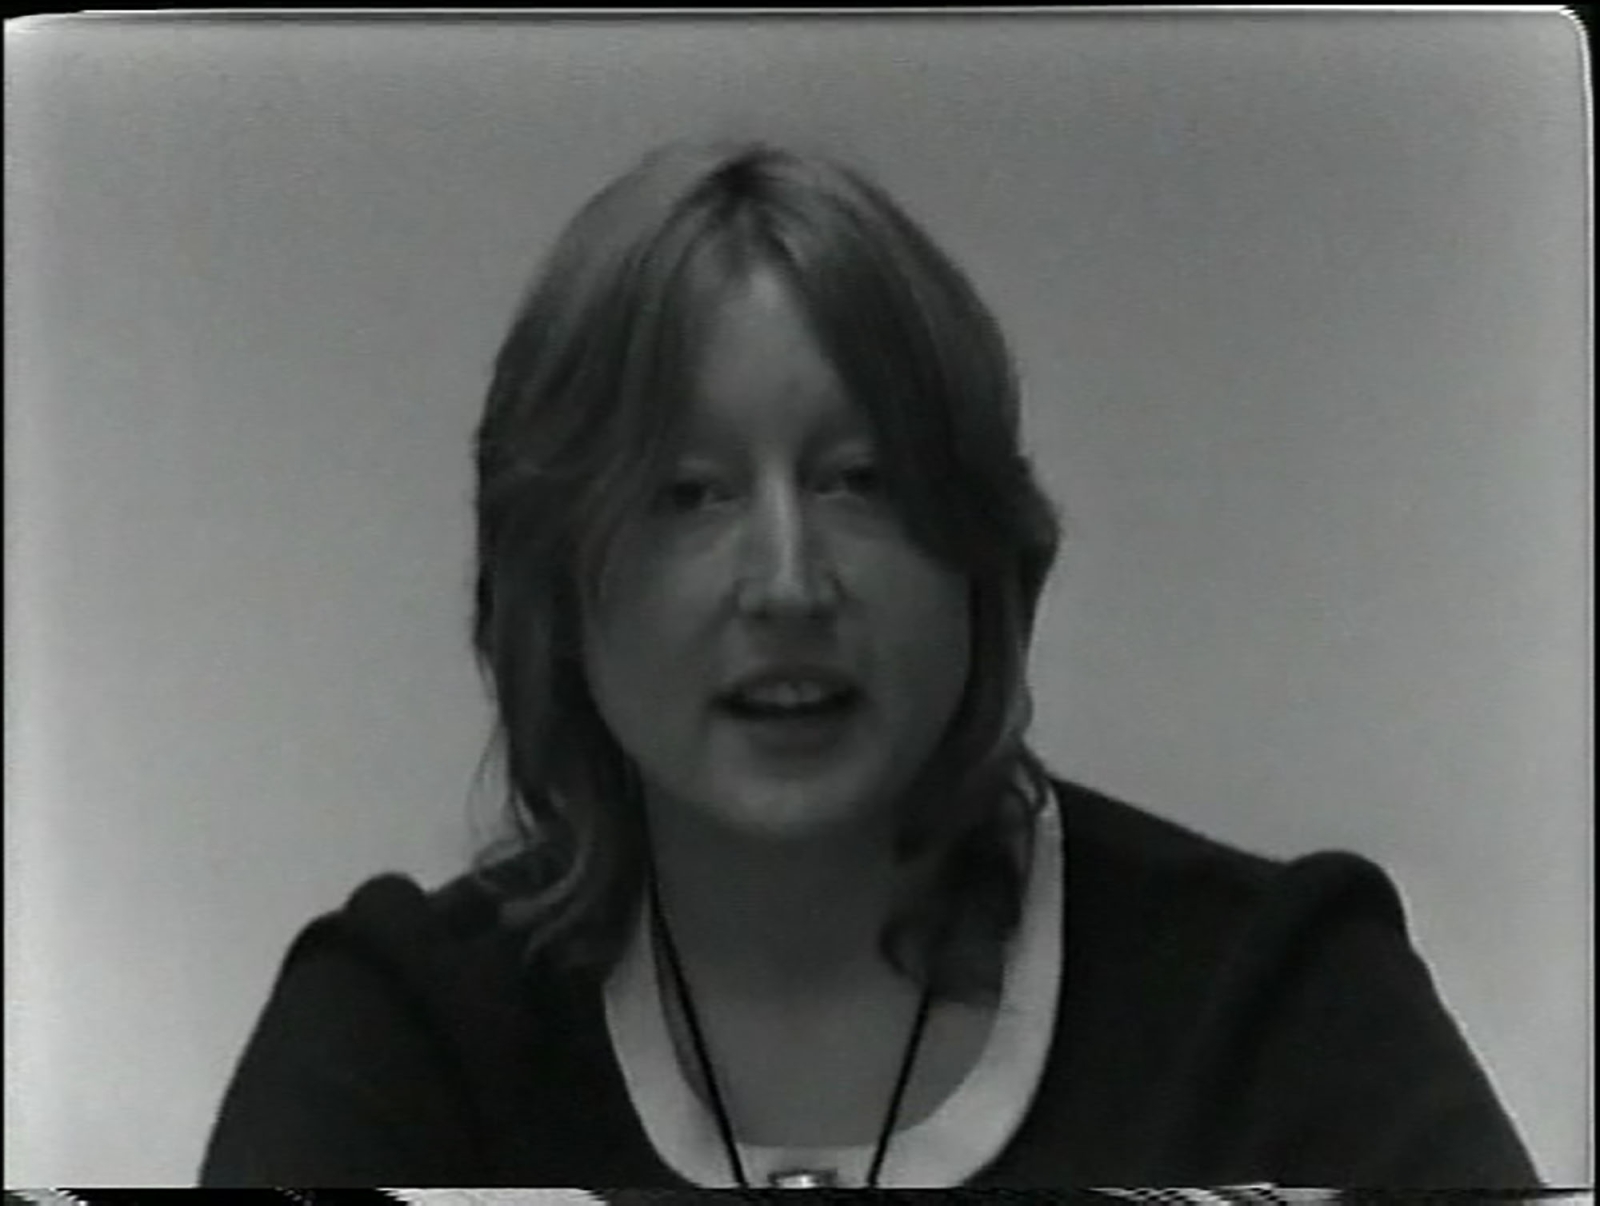 Martha Wilson
Appearance as Value, 1972
black and white, sound
TRT 1:48